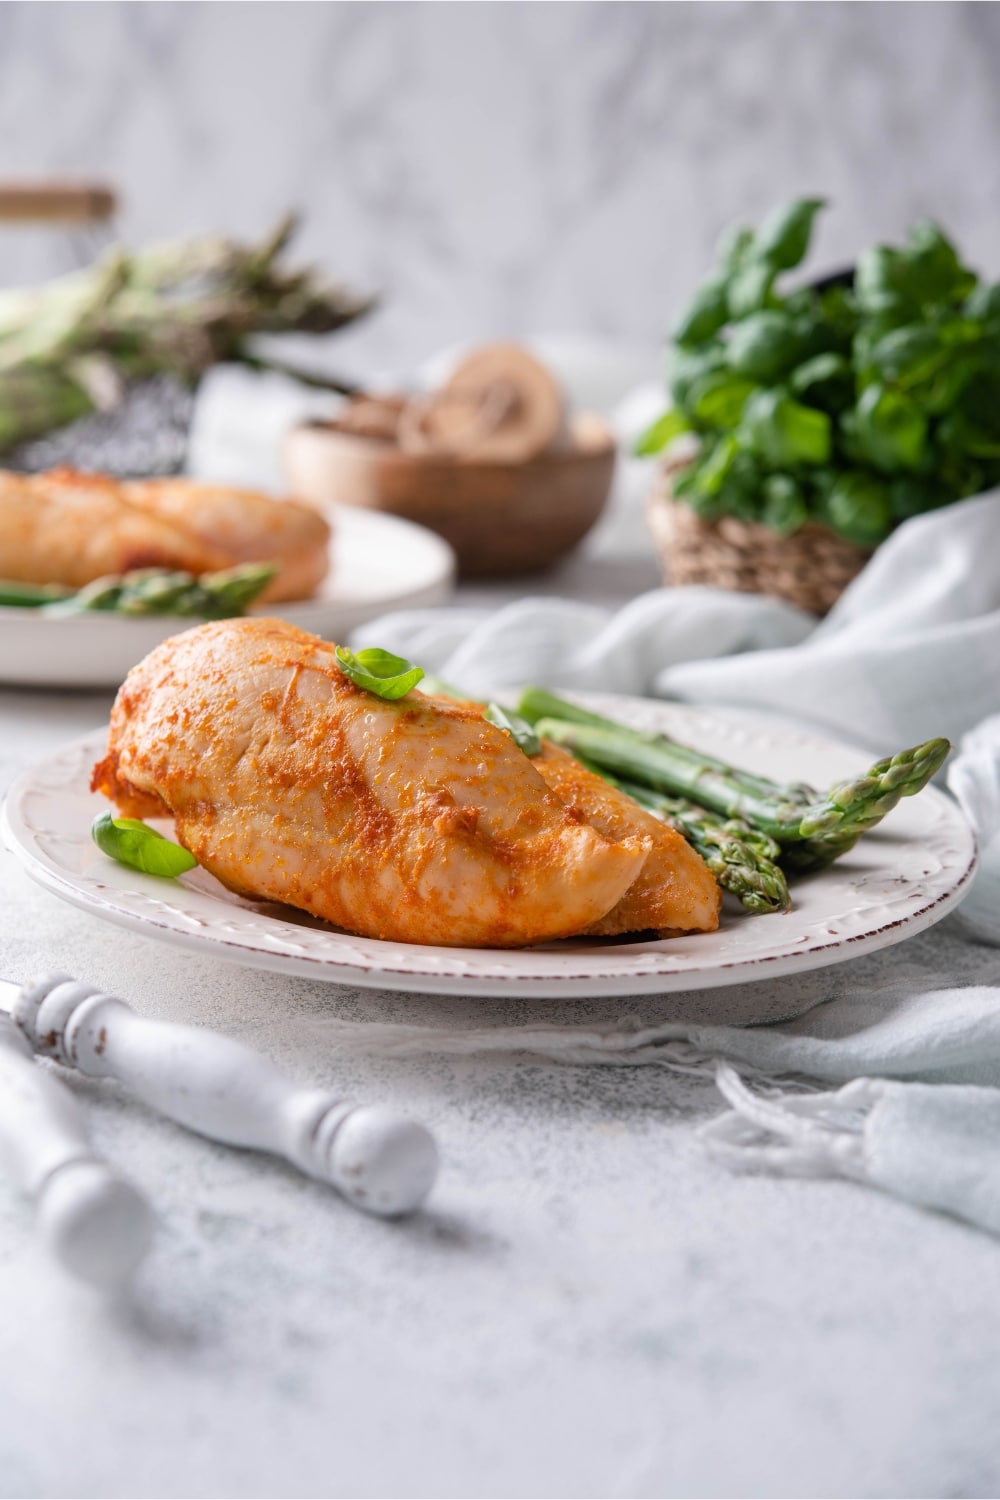 A plate of baked chicken breasts served with asparagus and garnished with basil leaves. A second serving is in the back.